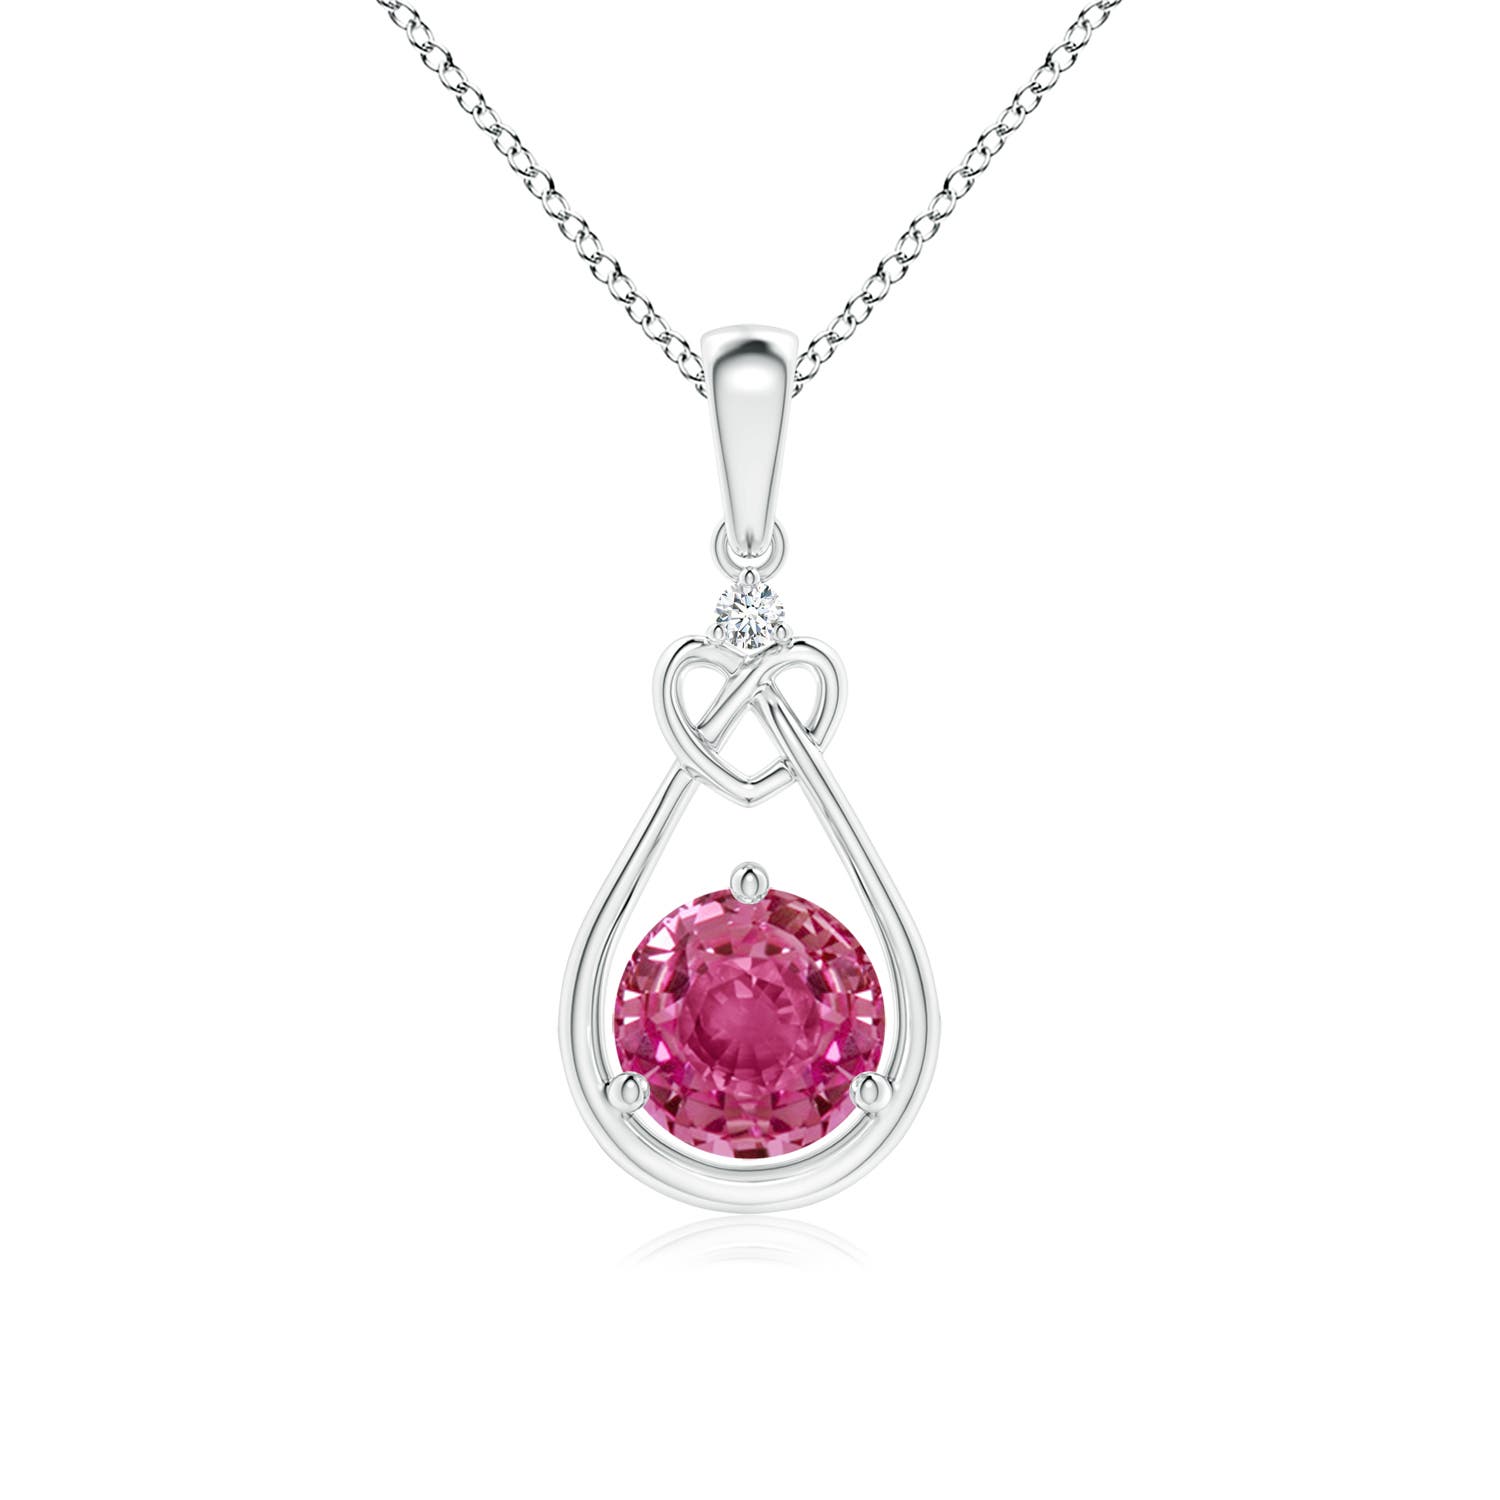 AAAA - Pink Sapphire / 1.01 CT / 14 KT White Gold